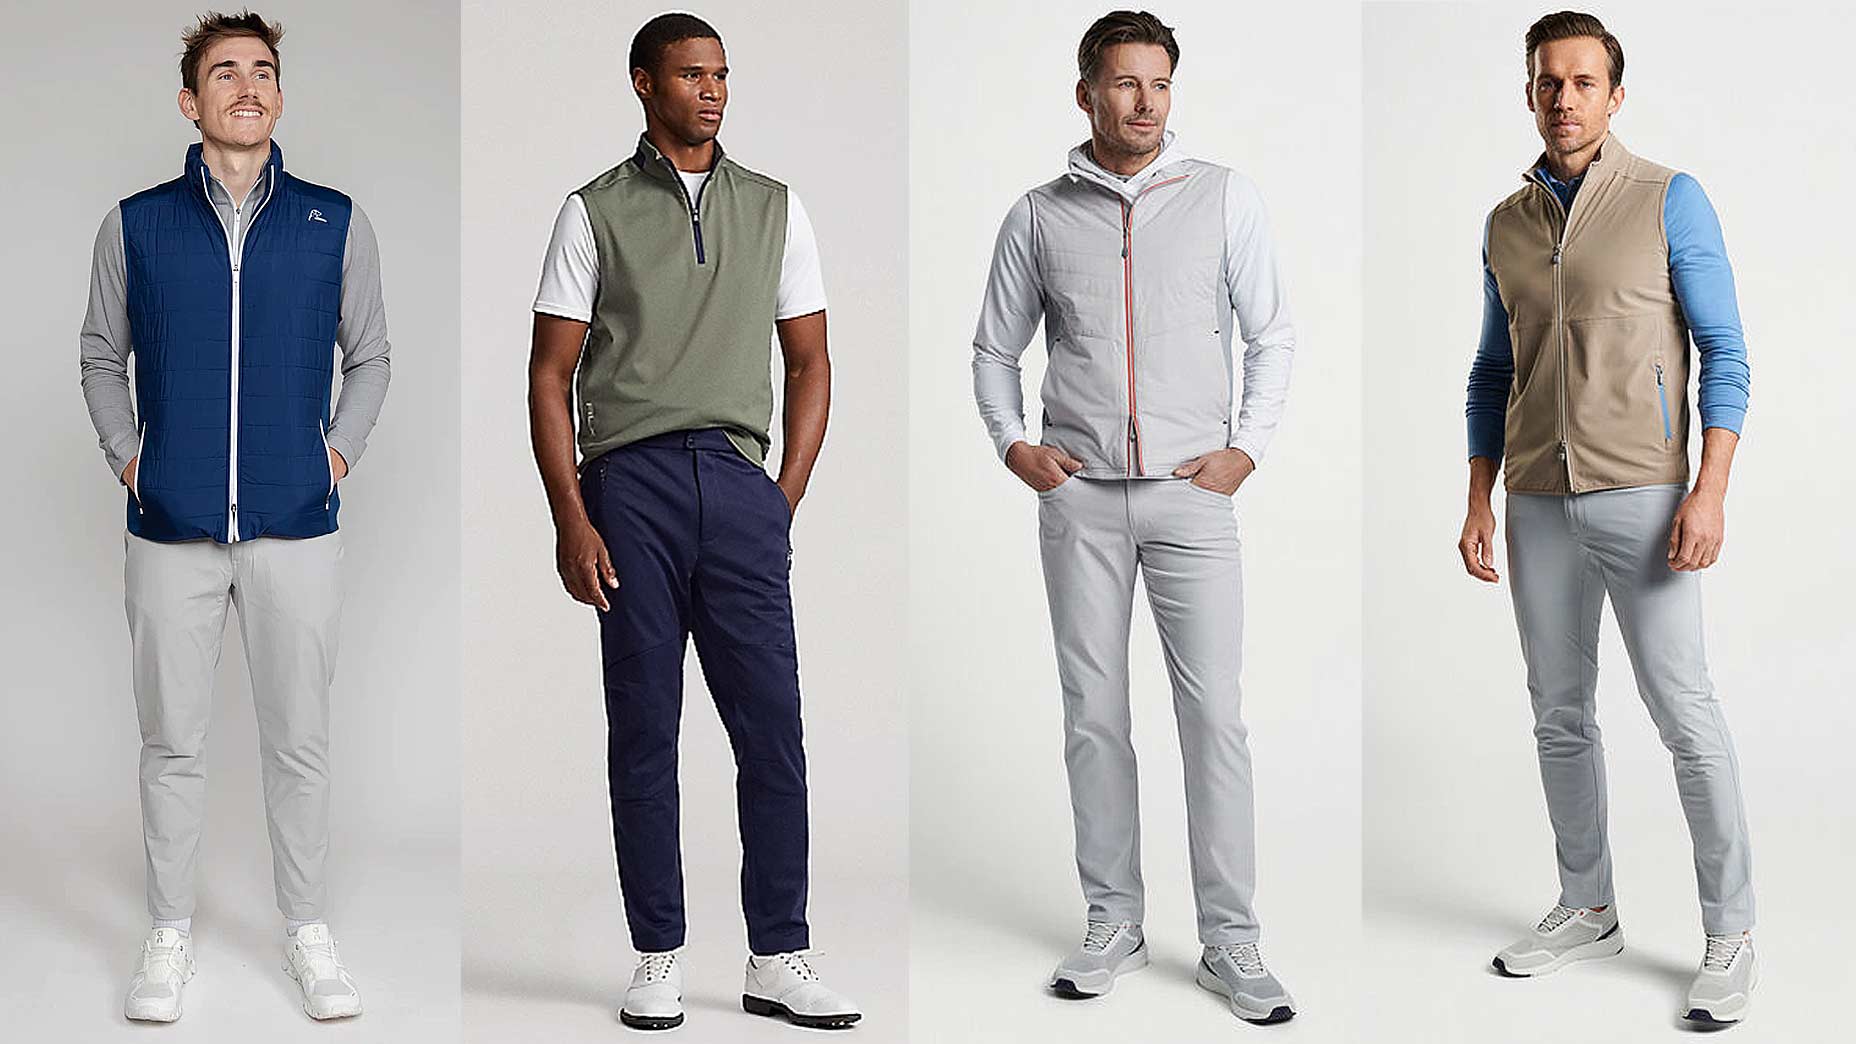 Best golf vests for fashion-forward functionality